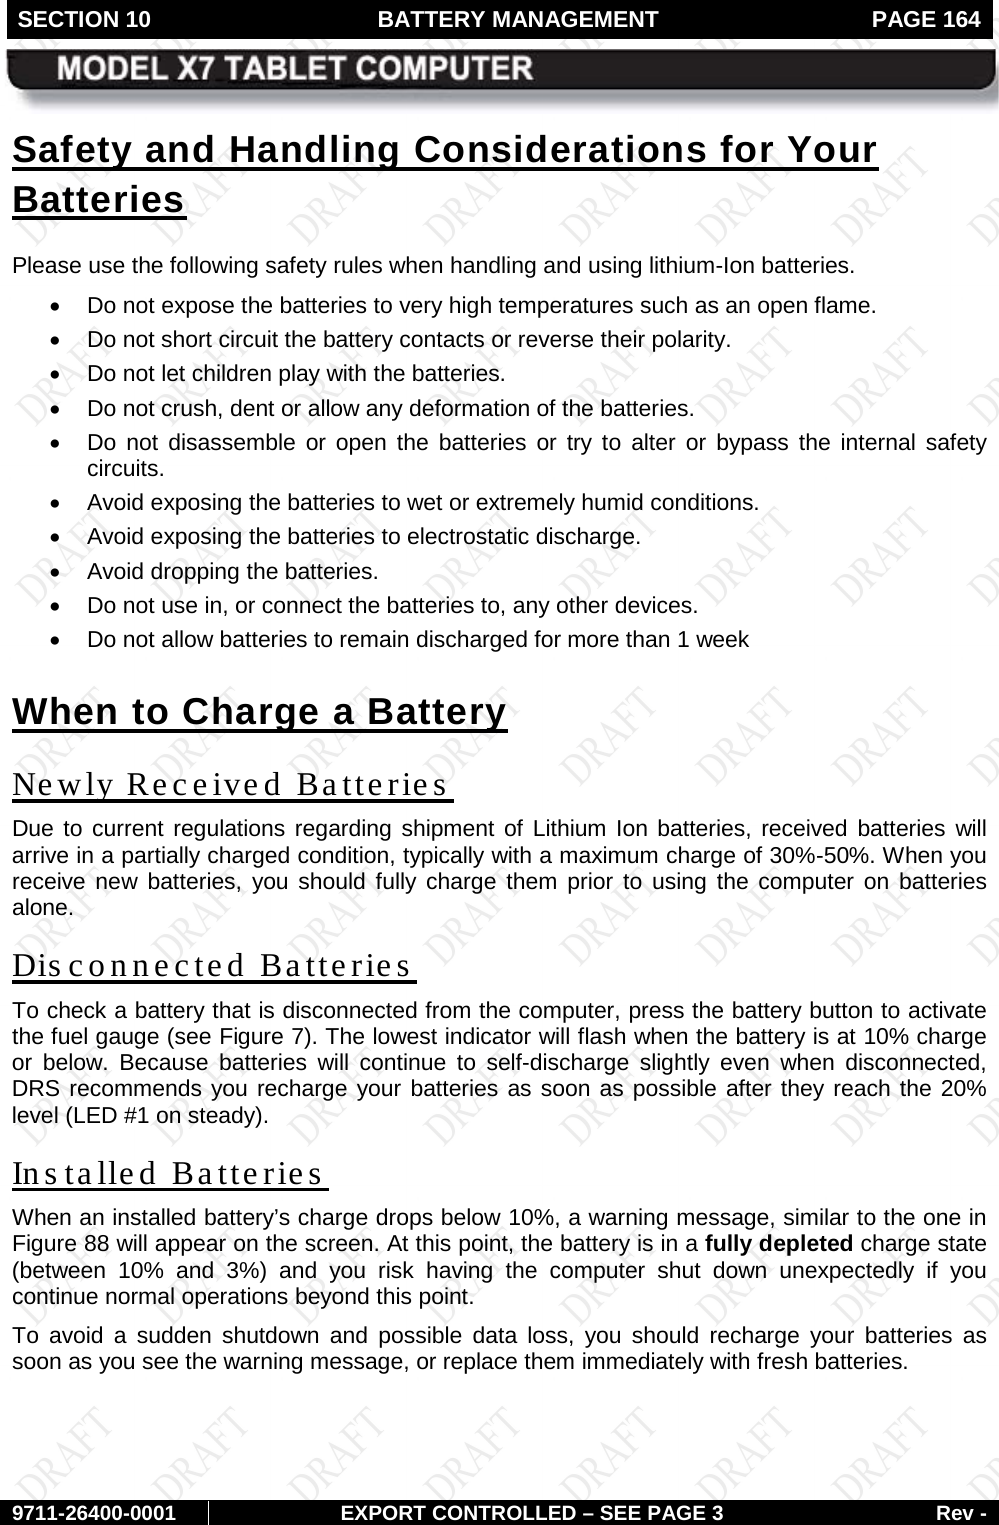 SECTION 10 BATTERY MANAGEMENT  PAGE 164        9711-26400-0001 EXPORT CONTROLLED – SEE PAGE 3 Rev - Safety and Handling Considerations for Your Batteries Please use the following safety rules when handling and using lithium-Ion batteries. • Do not expose the batteries to very high temperatures such as an open flame.  • Do not short circuit the battery contacts or reverse their polarity.  • Do not let children play with the batteries. • Do not crush, dent or allow any deformation of the batteries. • Do not disassemble or open the batteries or try to alter or bypass the internal safety circuits.  • Avoid exposing the batteries to wet or extremely humid conditions. • Avoid exposing the batteries to electrostatic discharge. • Avoid dropping the batteries. • Do not use in, or connect the batteries to, any other devices.  • Do not allow batteries to remain discharged for more than 1 week When to Charge a Battery Newly Received Batteries Due to current regulations regarding shipment of Lithium Ion batteries, received batteries will arrive in a partially charged condition, typically with a maximum charge of 30%-50%. When you receive new batteries, you should fully charge them prior to using the computer on batteries alone. Disconnected Batteries To check a battery that is disconnected from the computer, press the battery button to activate the fuel gauge (see Figure 7). The lowest indicator will flash when the battery is at 10% charge or below. Because batteries will continue to self-discharge slightly even when disconnected, DRS recommends you recharge your batteries as soon as possible after they reach the 20% level (LED #1 on steady). In s ta lle d  Batteries When an installed battery’s charge drops below 10%, a warning message, similar to the one in Figure 88 will appear on the screen. At this point, the battery is in a fully depleted charge state (between 10% and 3%) and you risk having the computer shut down unexpectedly if you continue normal operations beyond this point.  To avoid a sudden shutdown and possible data loss, you should recharge your batteries as soon as you see the warning message, or replace them immediately with fresh batteries.   